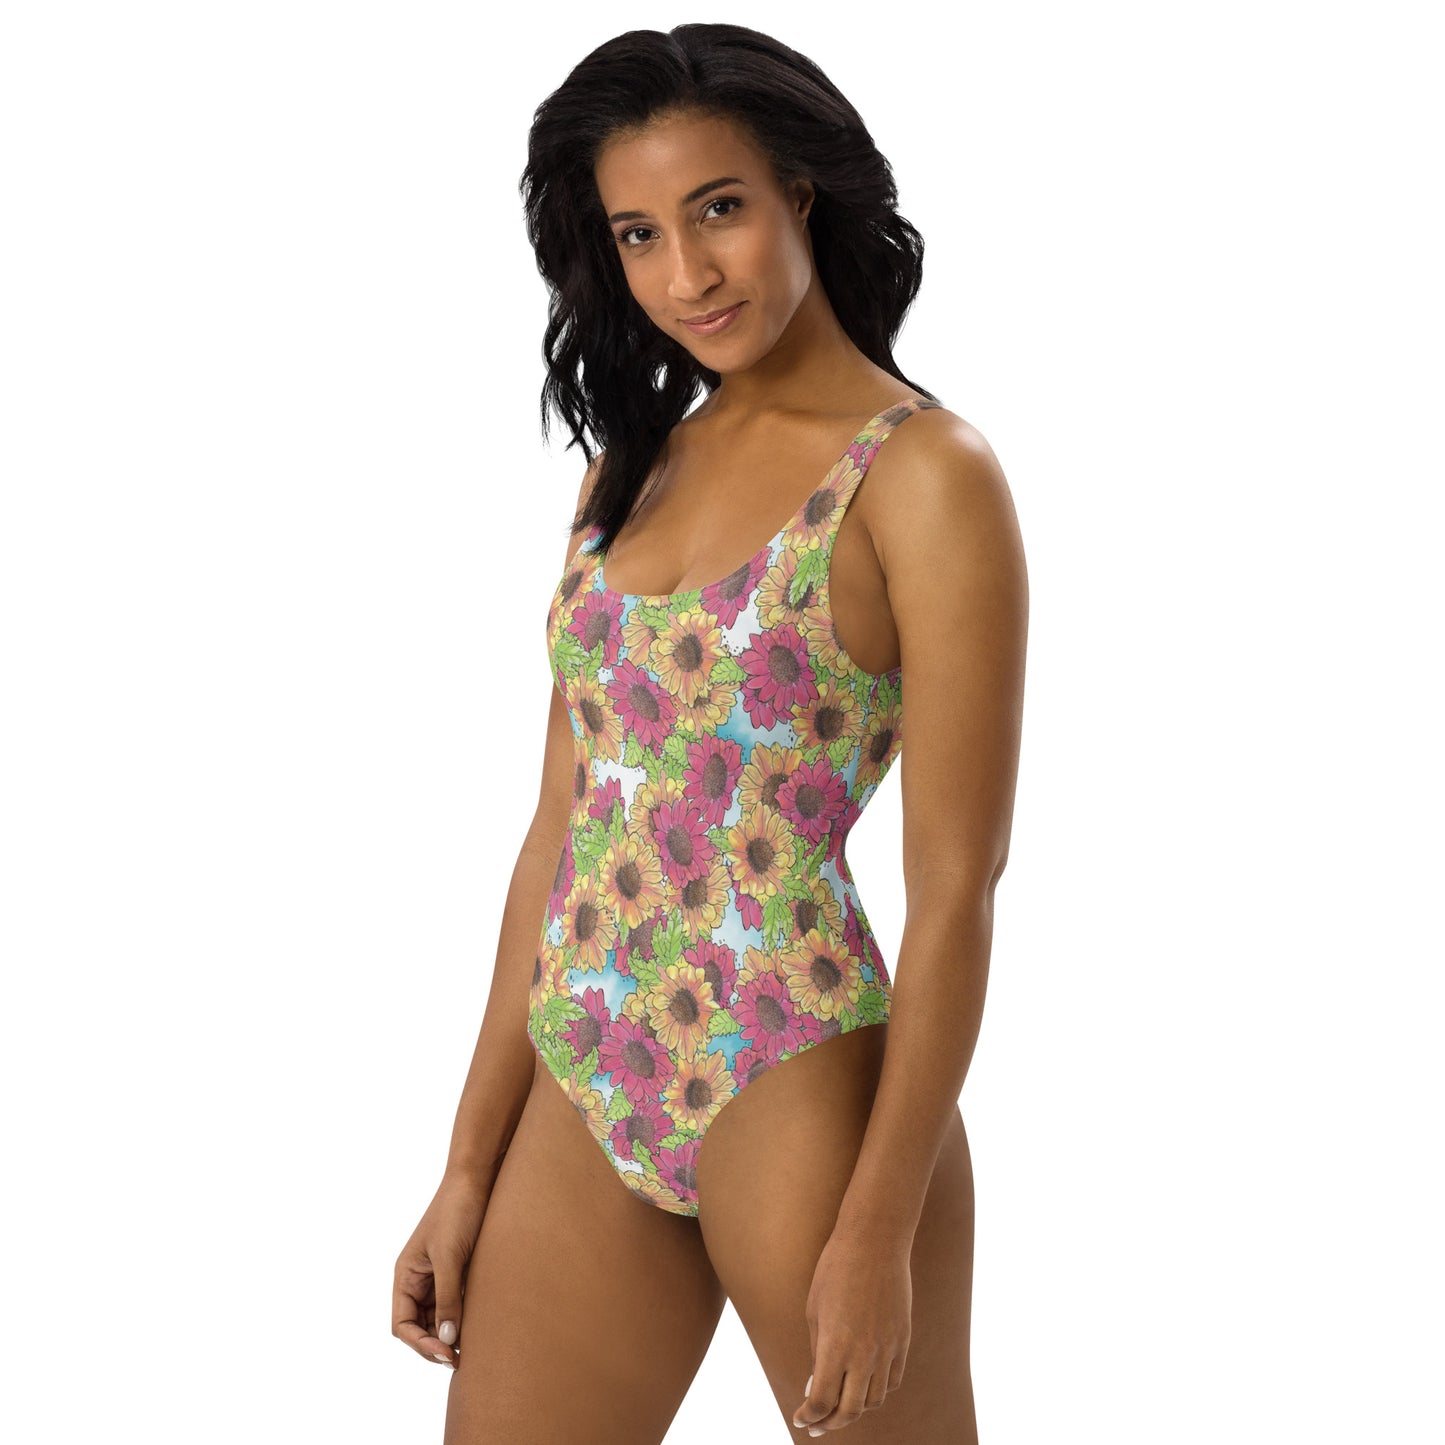 Gerber daisies one piece women's swimsuit. Yellow and red watercolor gerber daisies print. Shown on female model. Available in XS to 3XL.